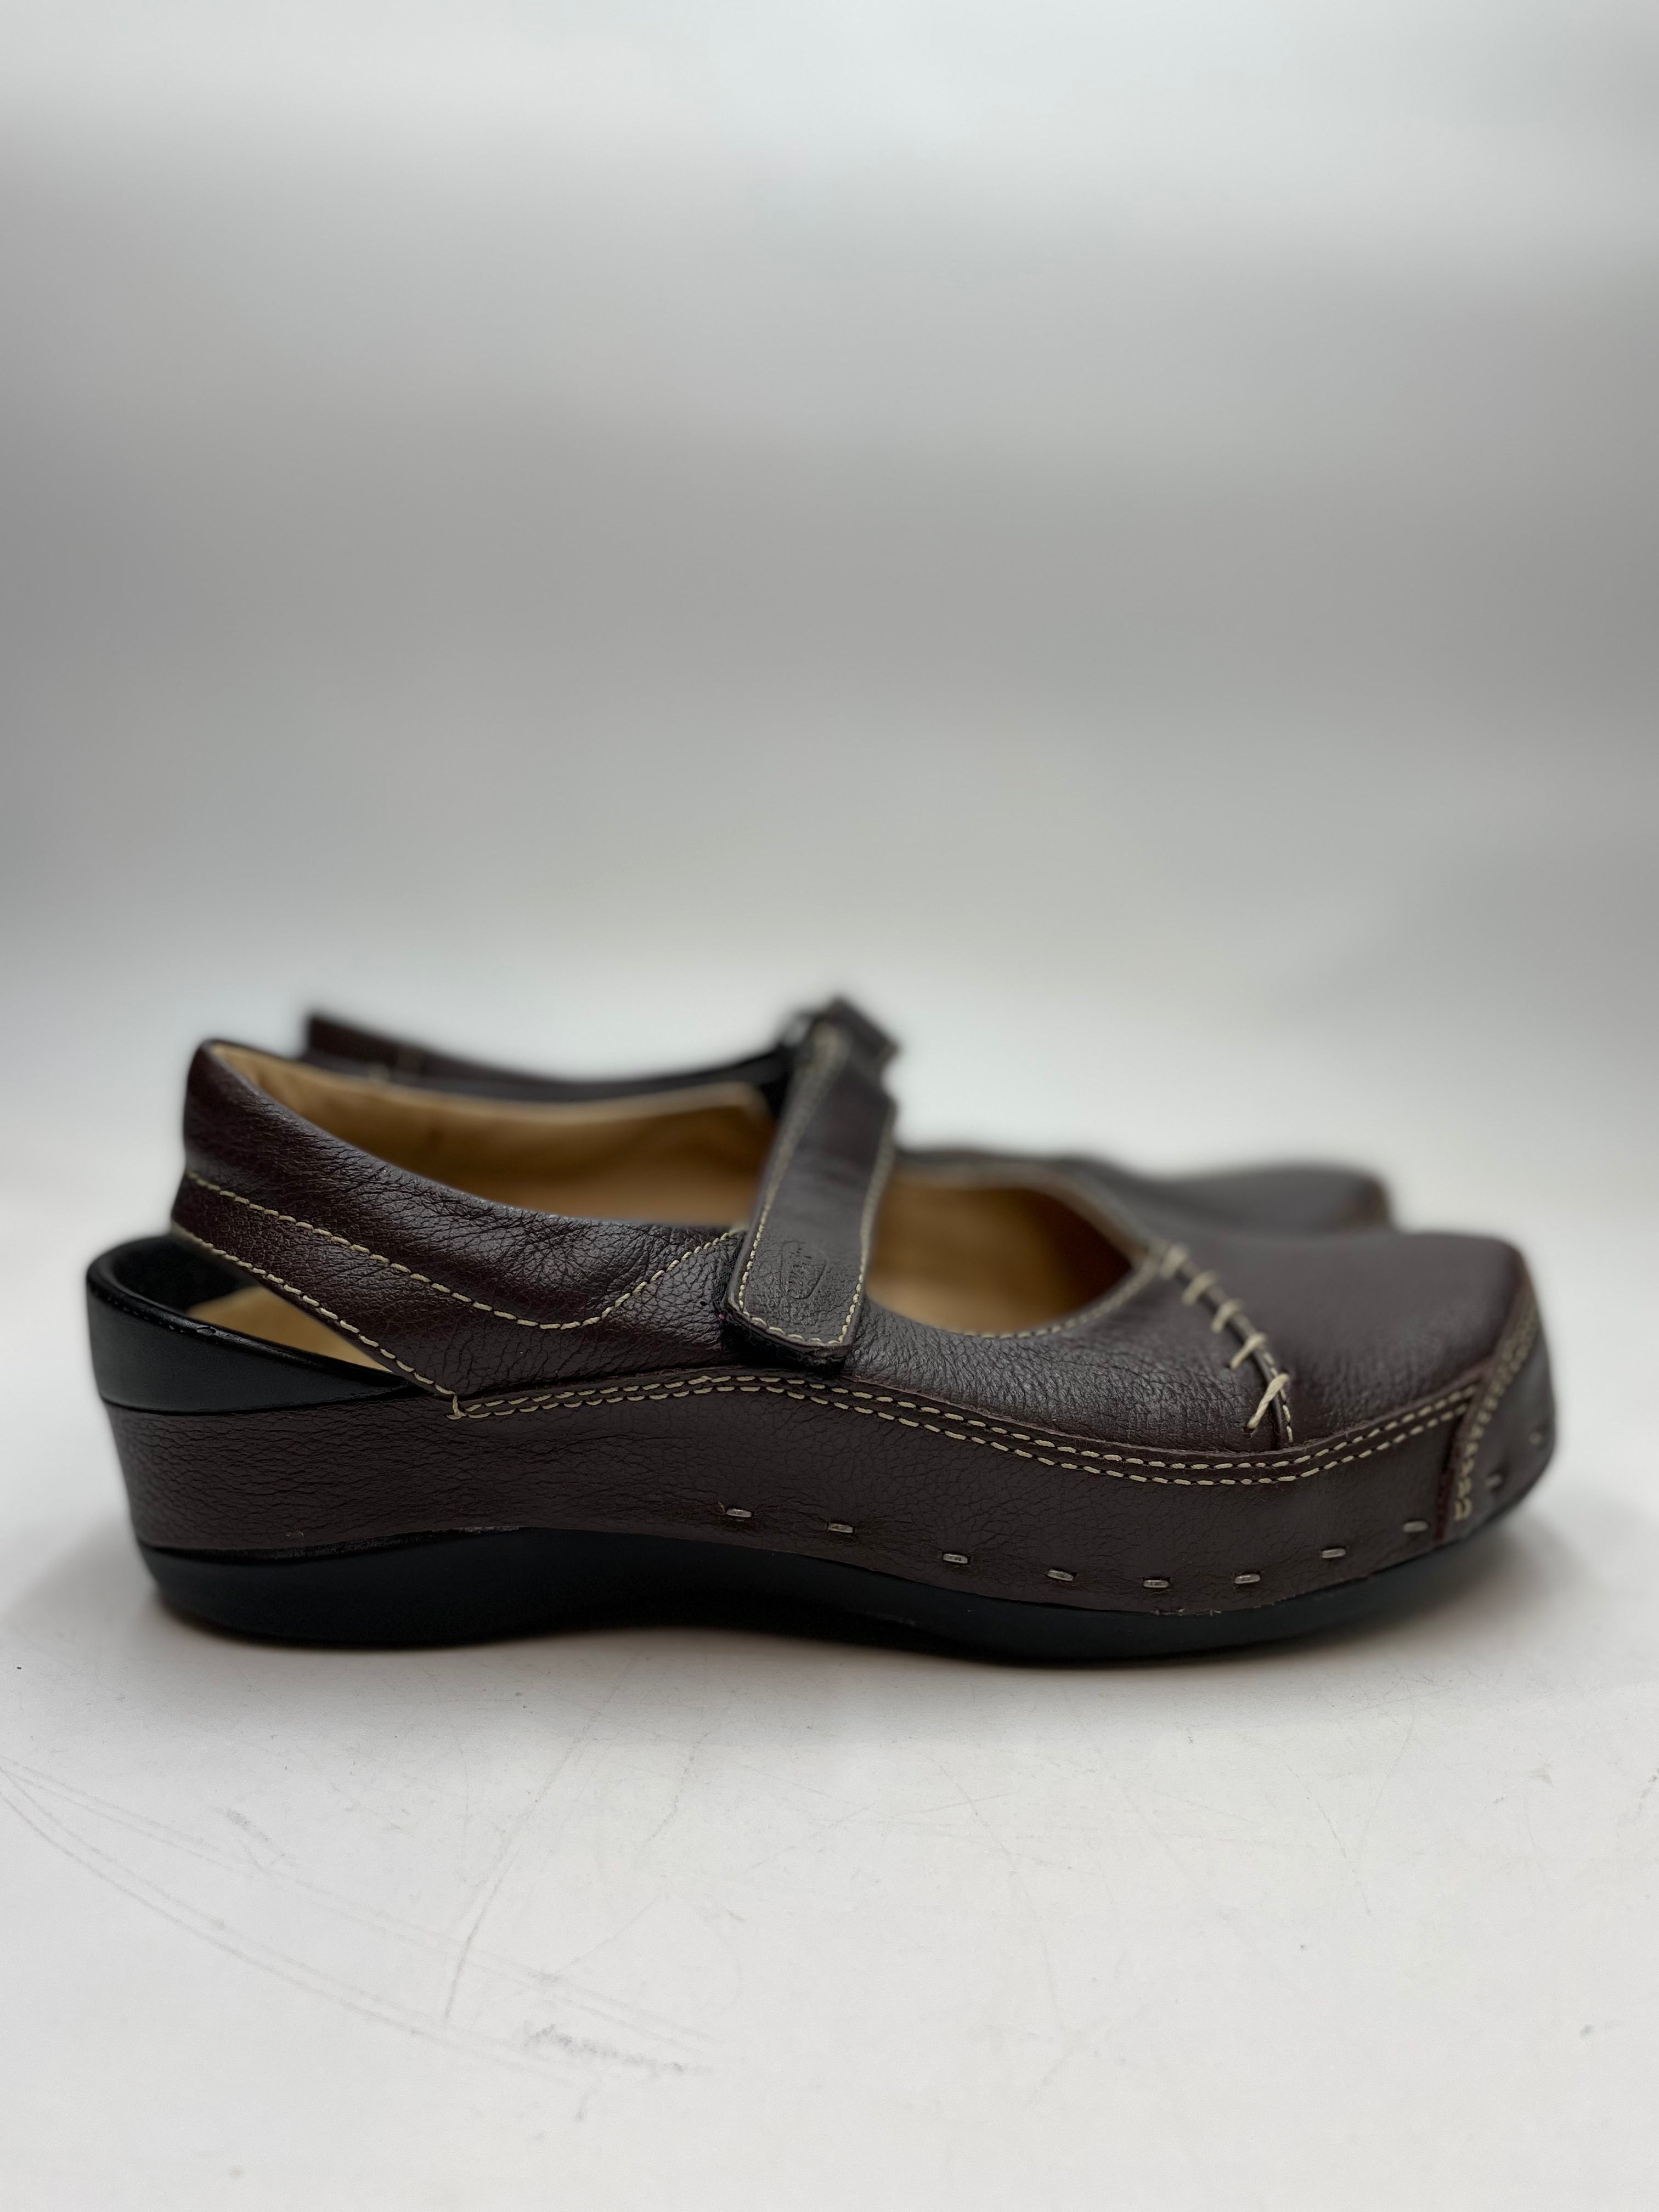 Wolky Strap Cloggy Clog *New*